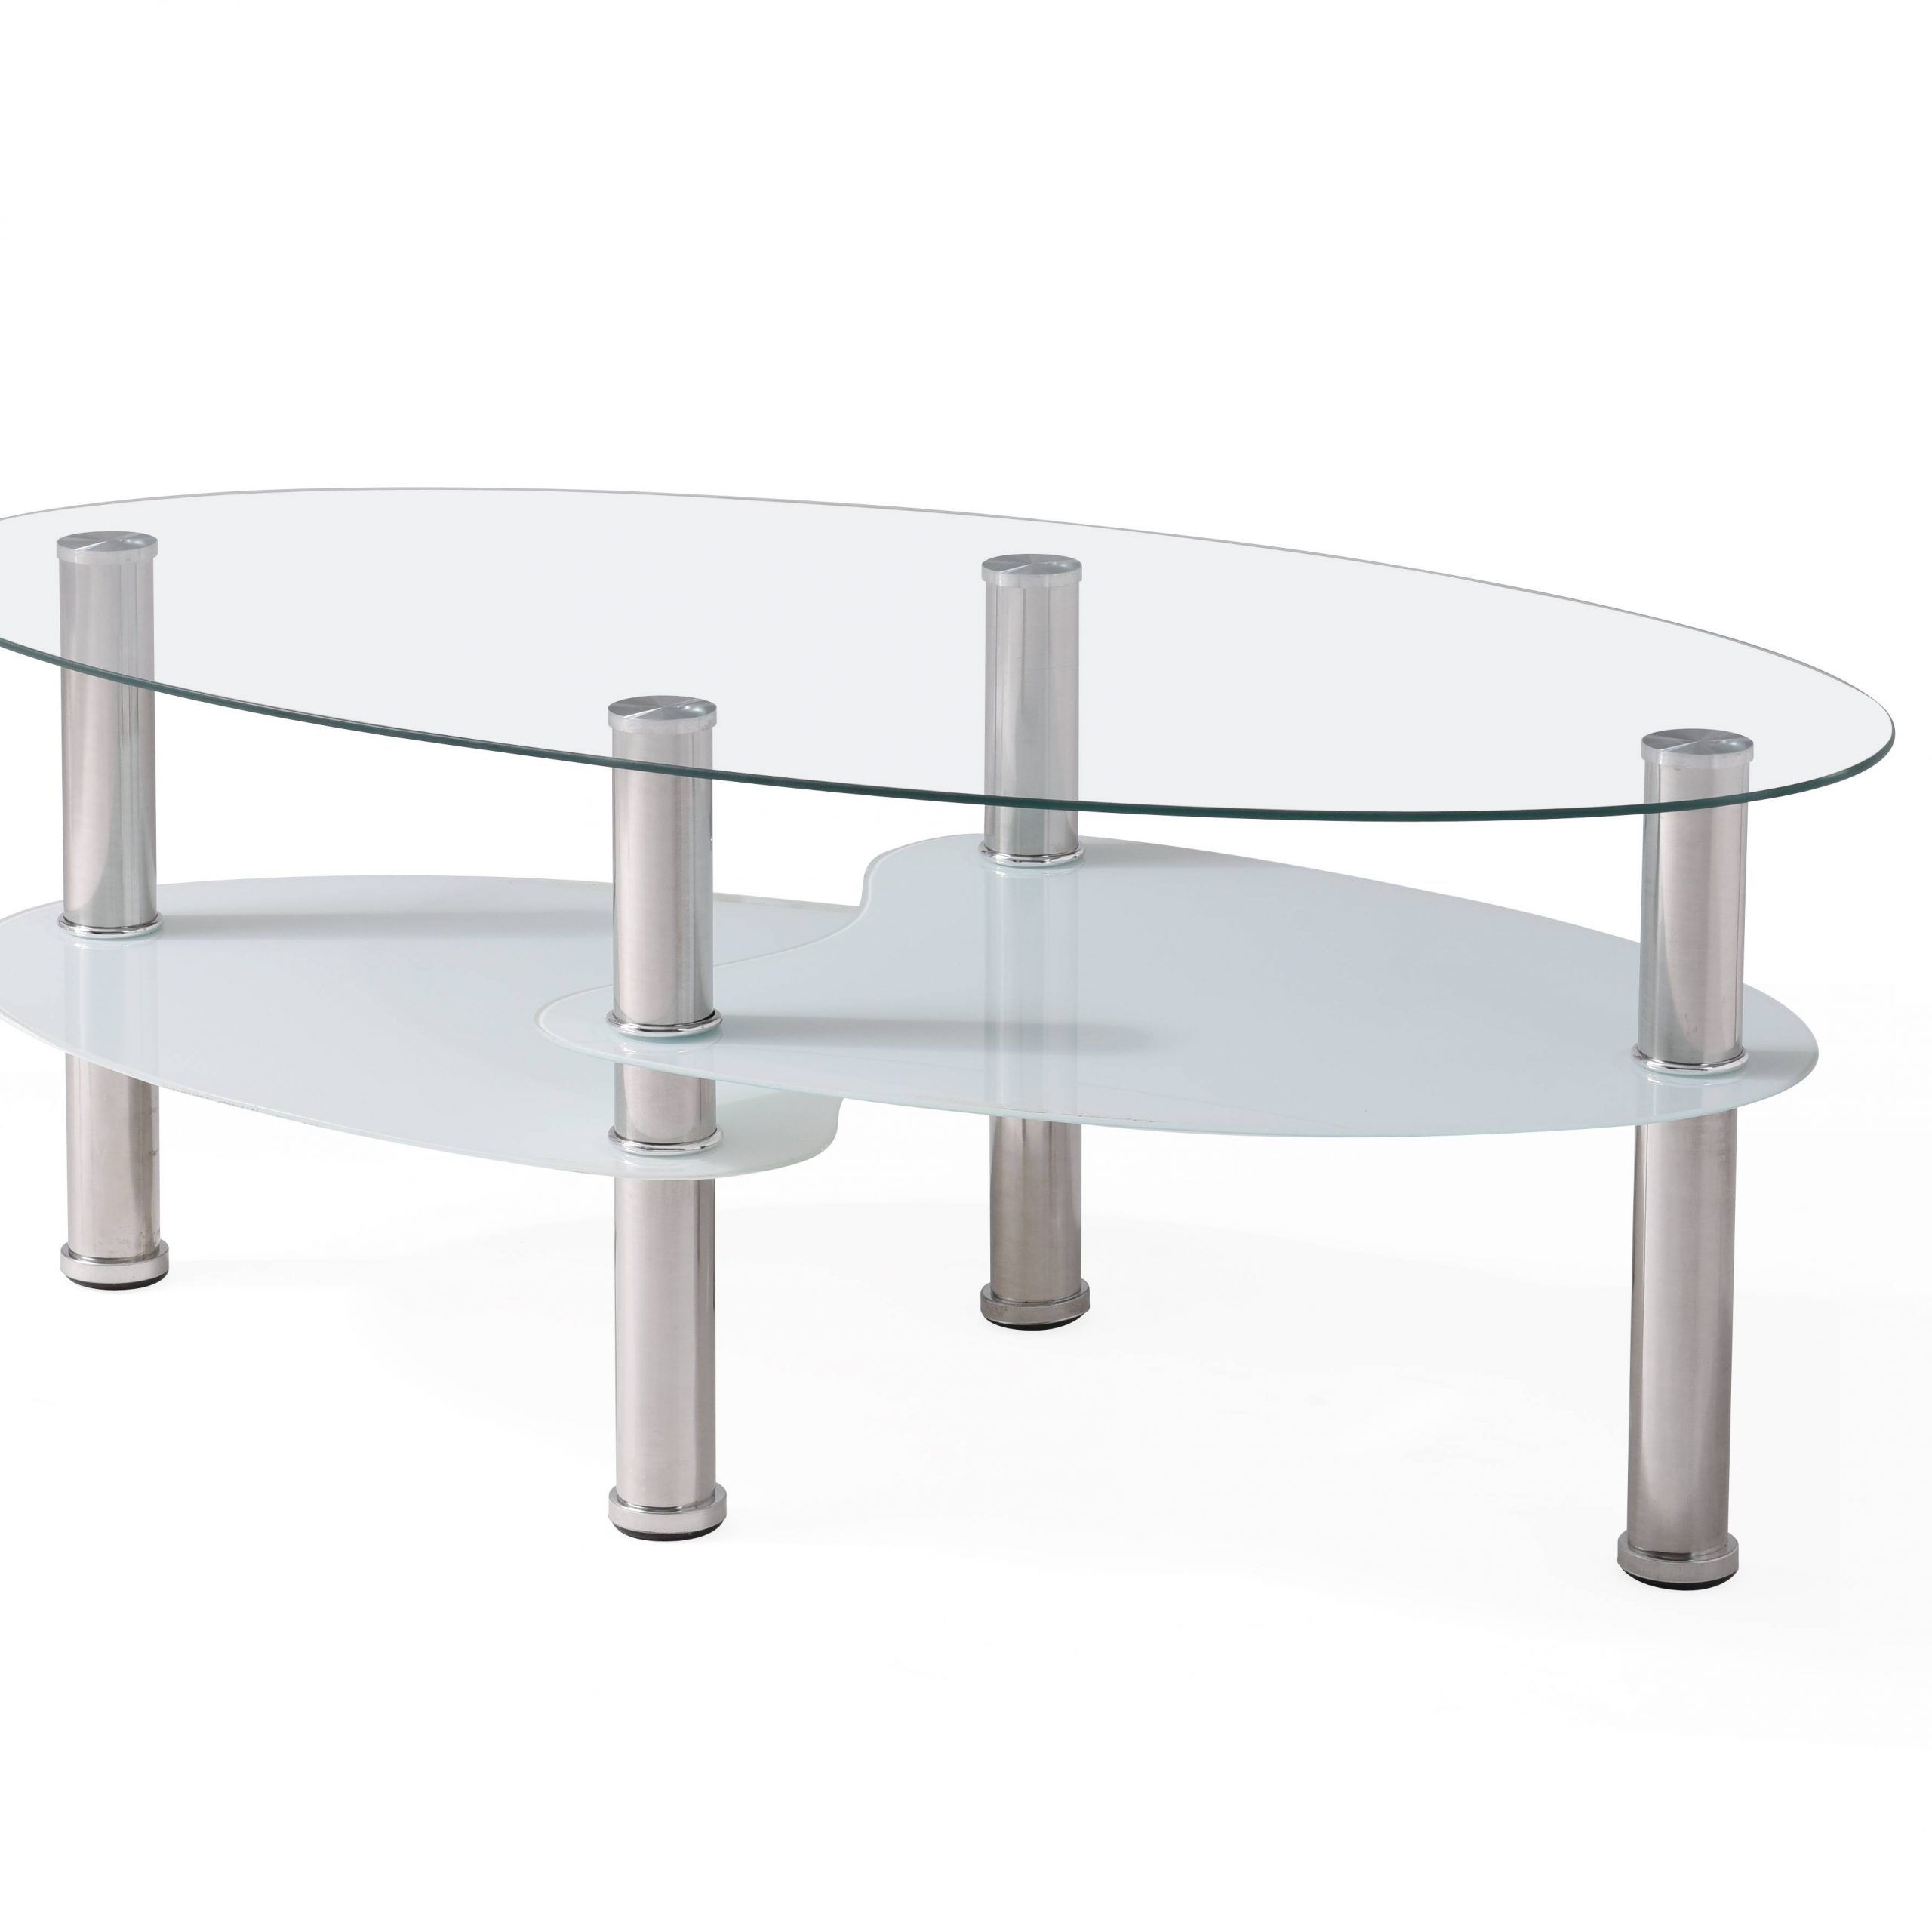 3 Tier Coffee Tables Intended For Famous Hodedah Oval Glass 3 Tier Coffee Table, Multiple Colors – Walmart (View 5 of 10)